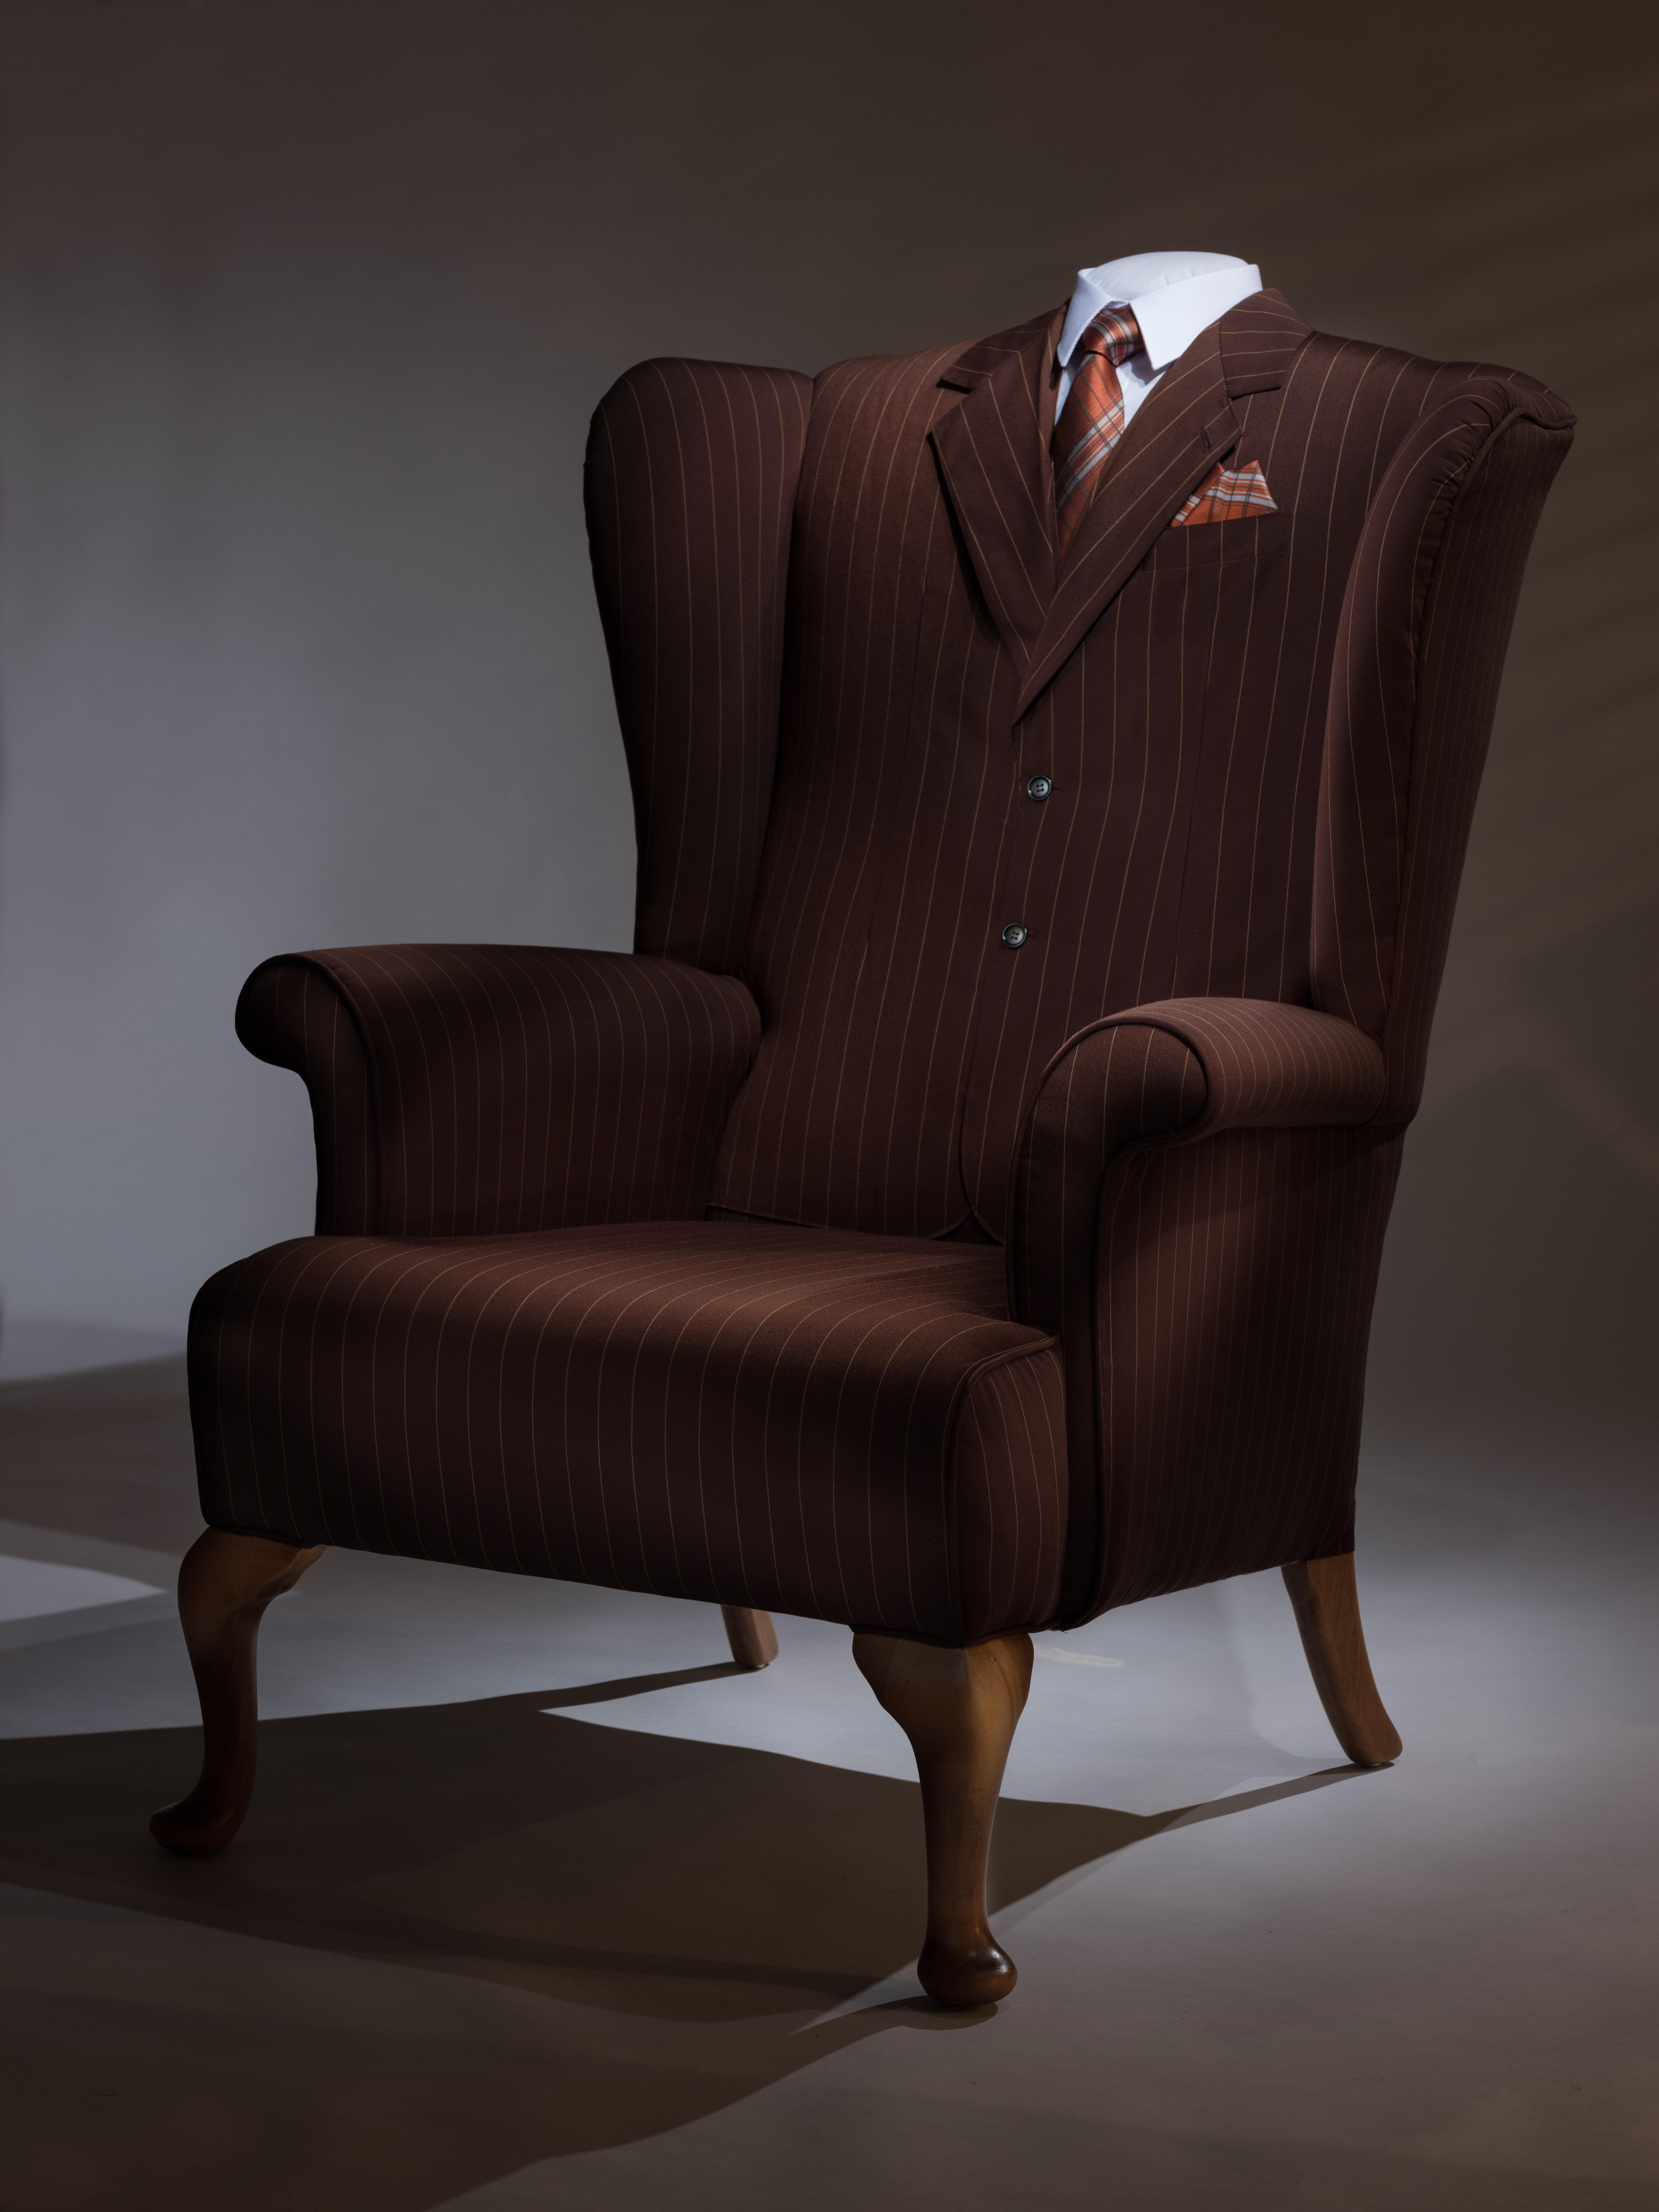 'The Great Gatsby' wing chair

Quirky mixture of an expertly tailored 'suit' form on a wing chair. We have restored a typical midcentury wing chair frame and lovingly created these one-off pieces of functional furniture art. Expertly made by our